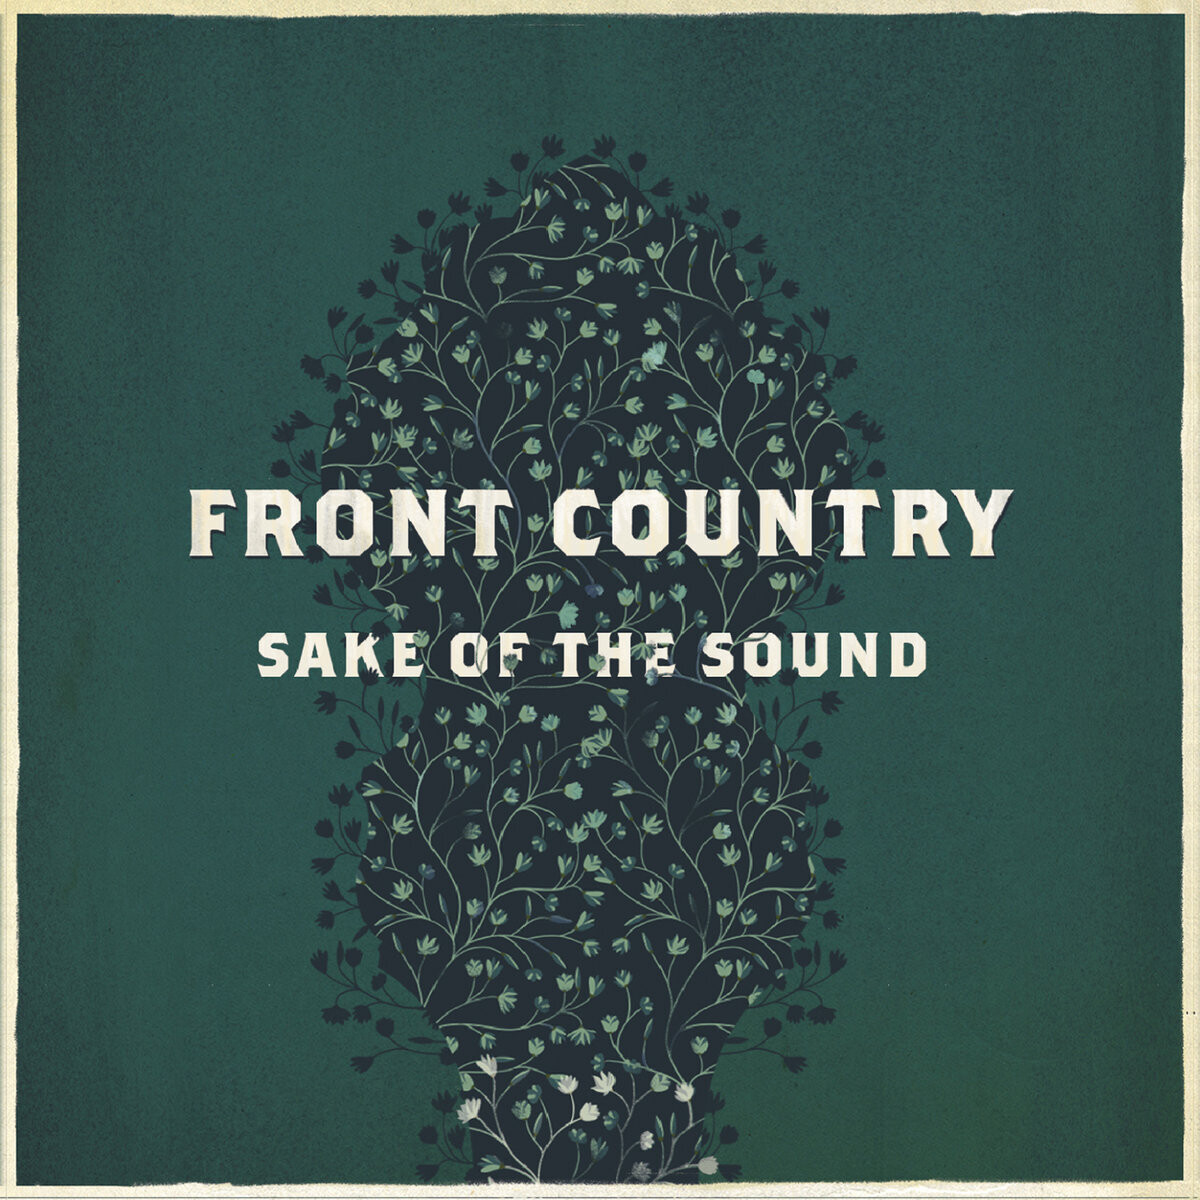 Front Country Sake of the Sound